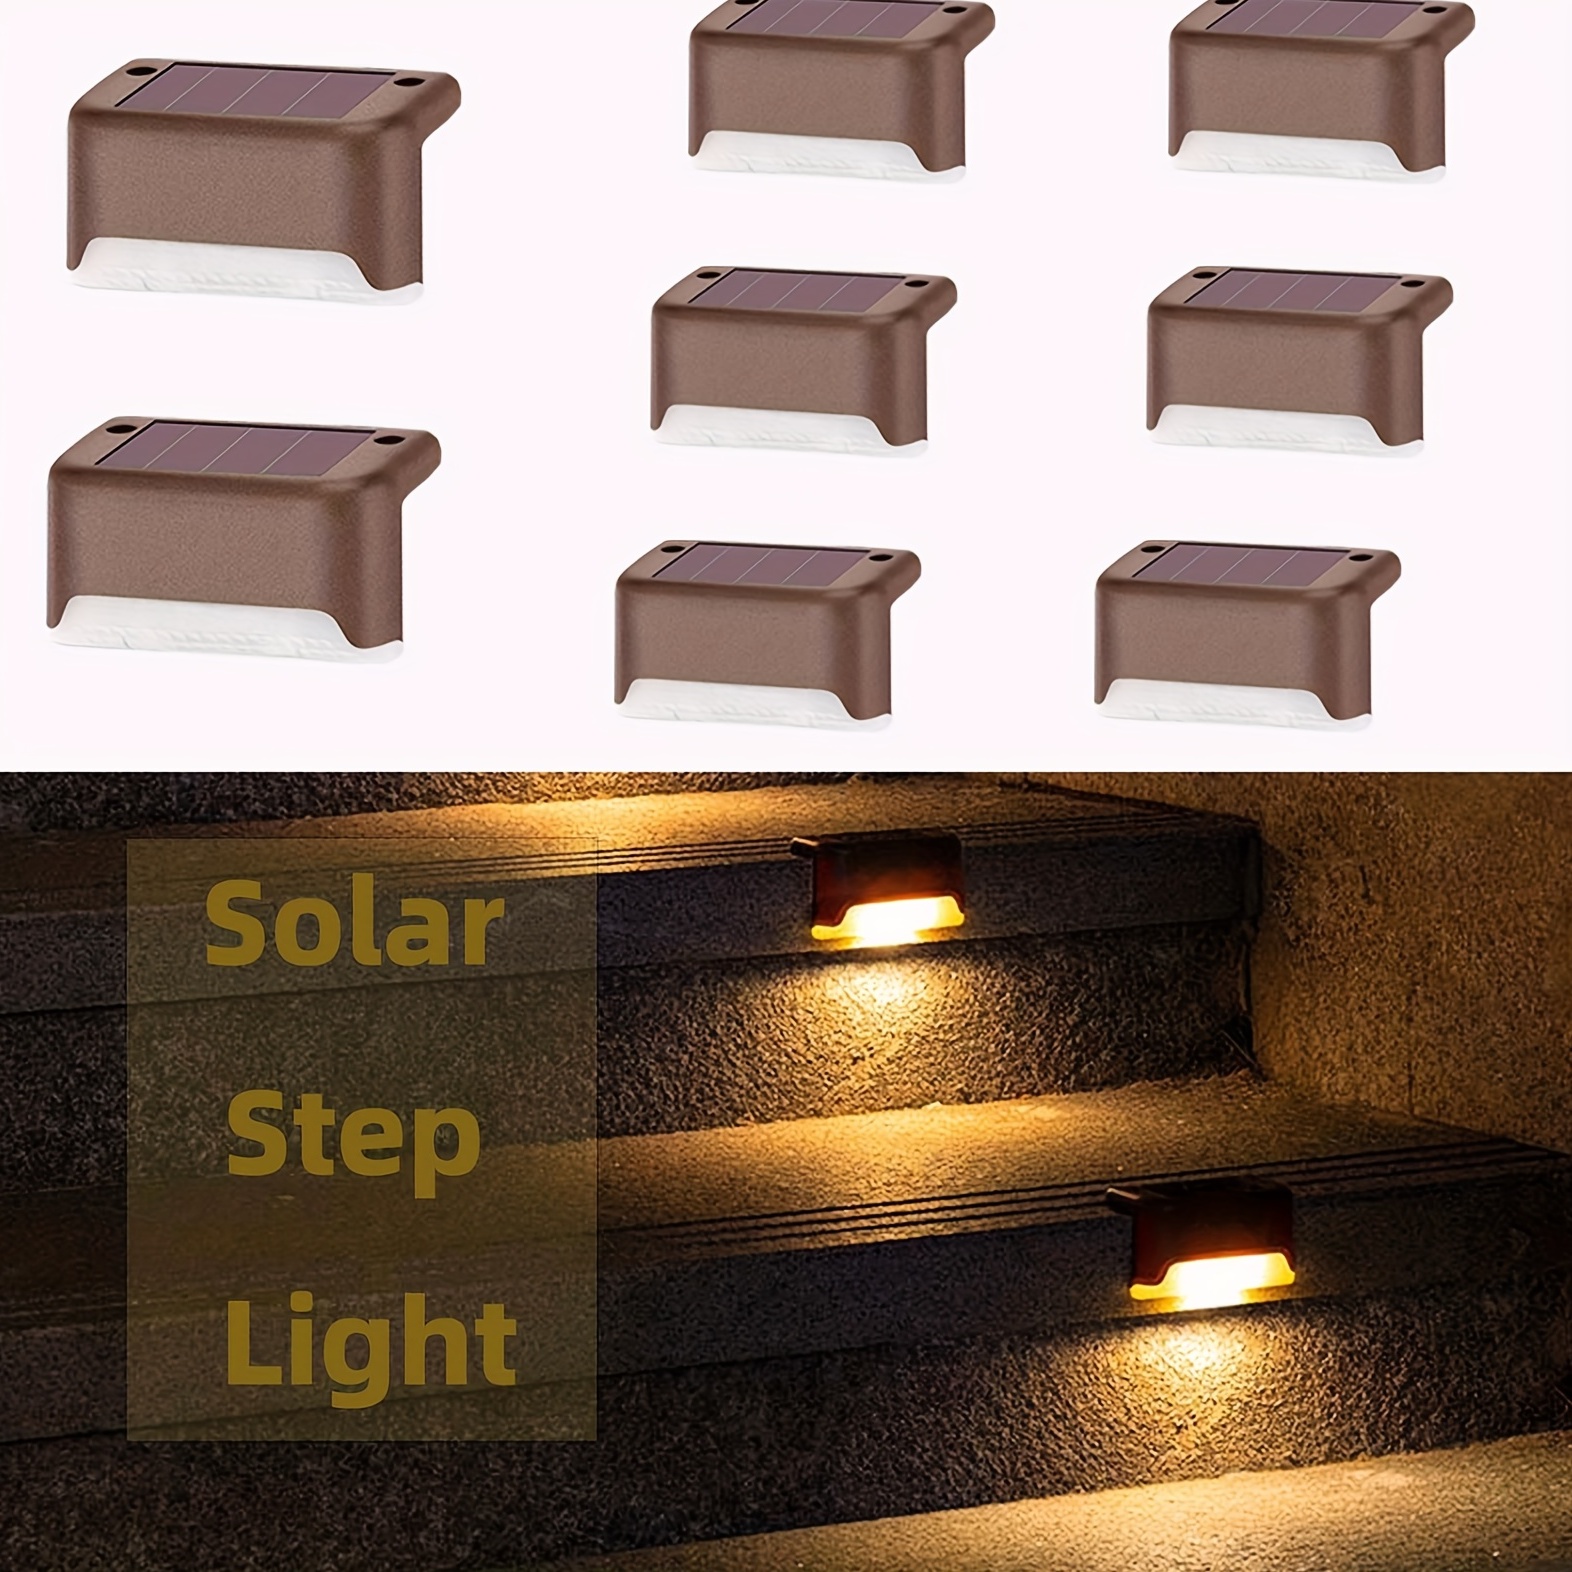 

8 Packs Solar Step Lights, For Fence Steps Stairs Decks Fences Paths Patio Pathway